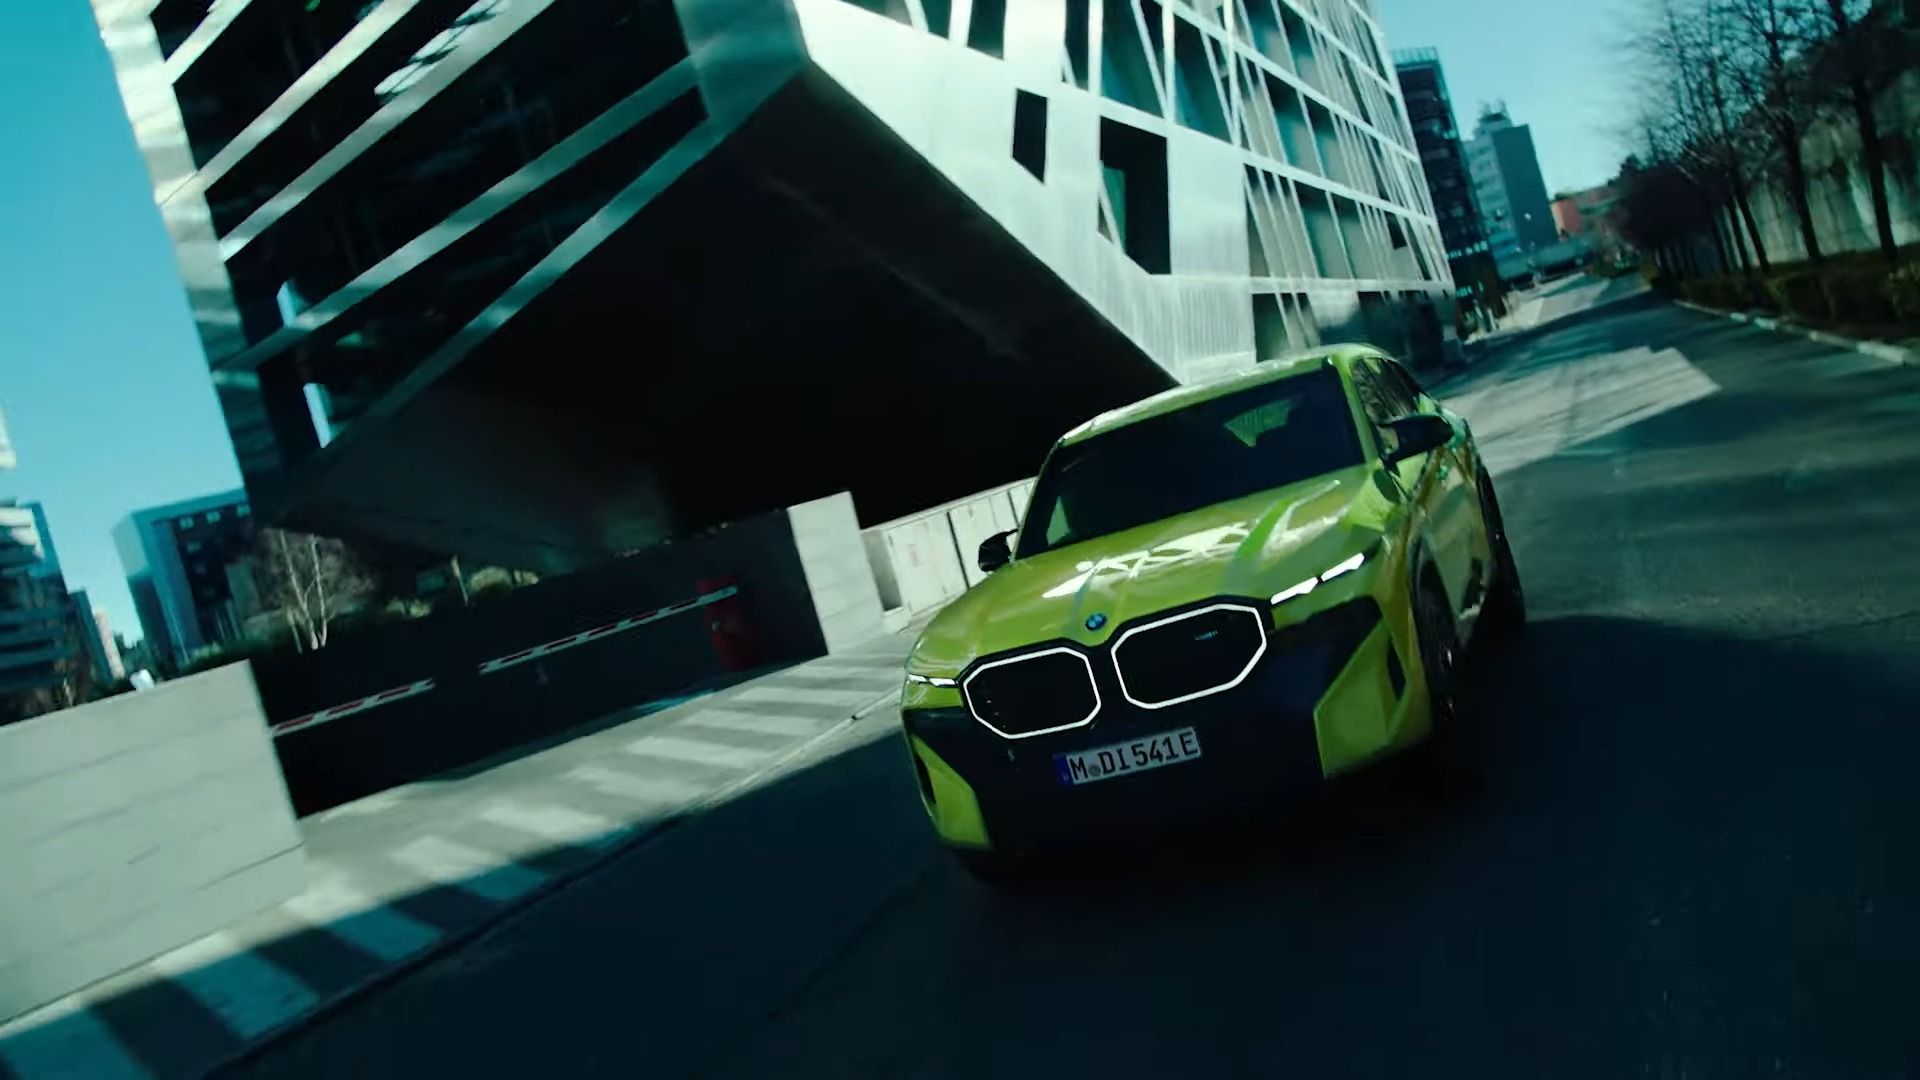 BMW XM 50e in lime color